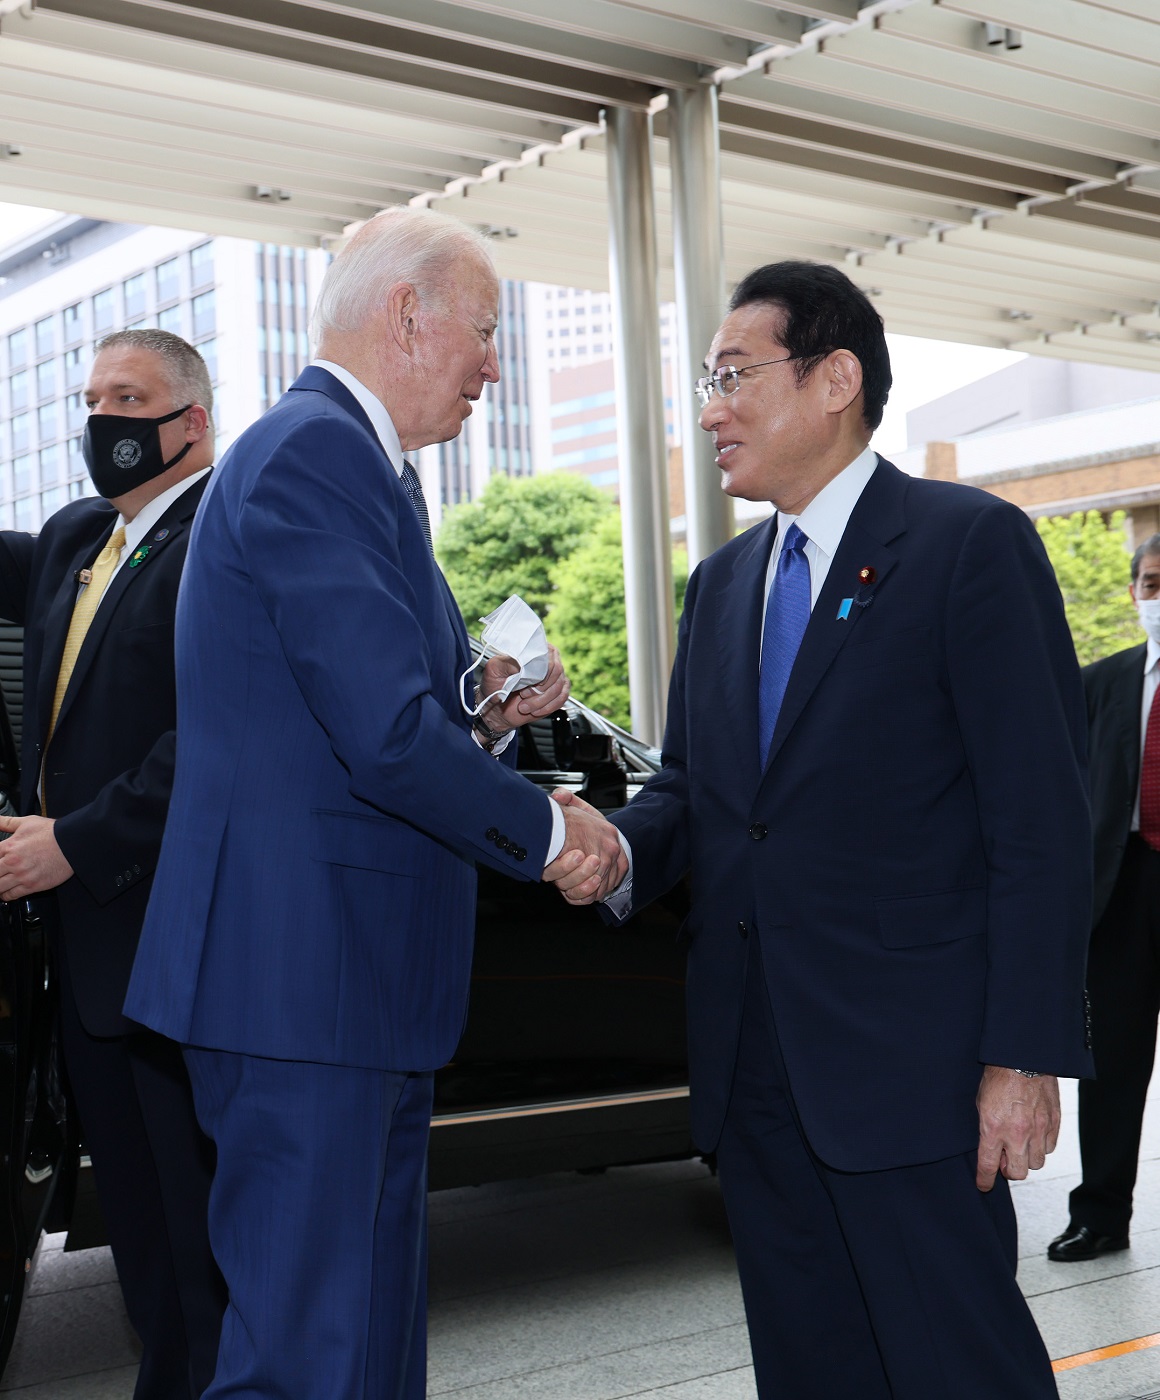 Photograph of the Prime Minister welcoming President Biden